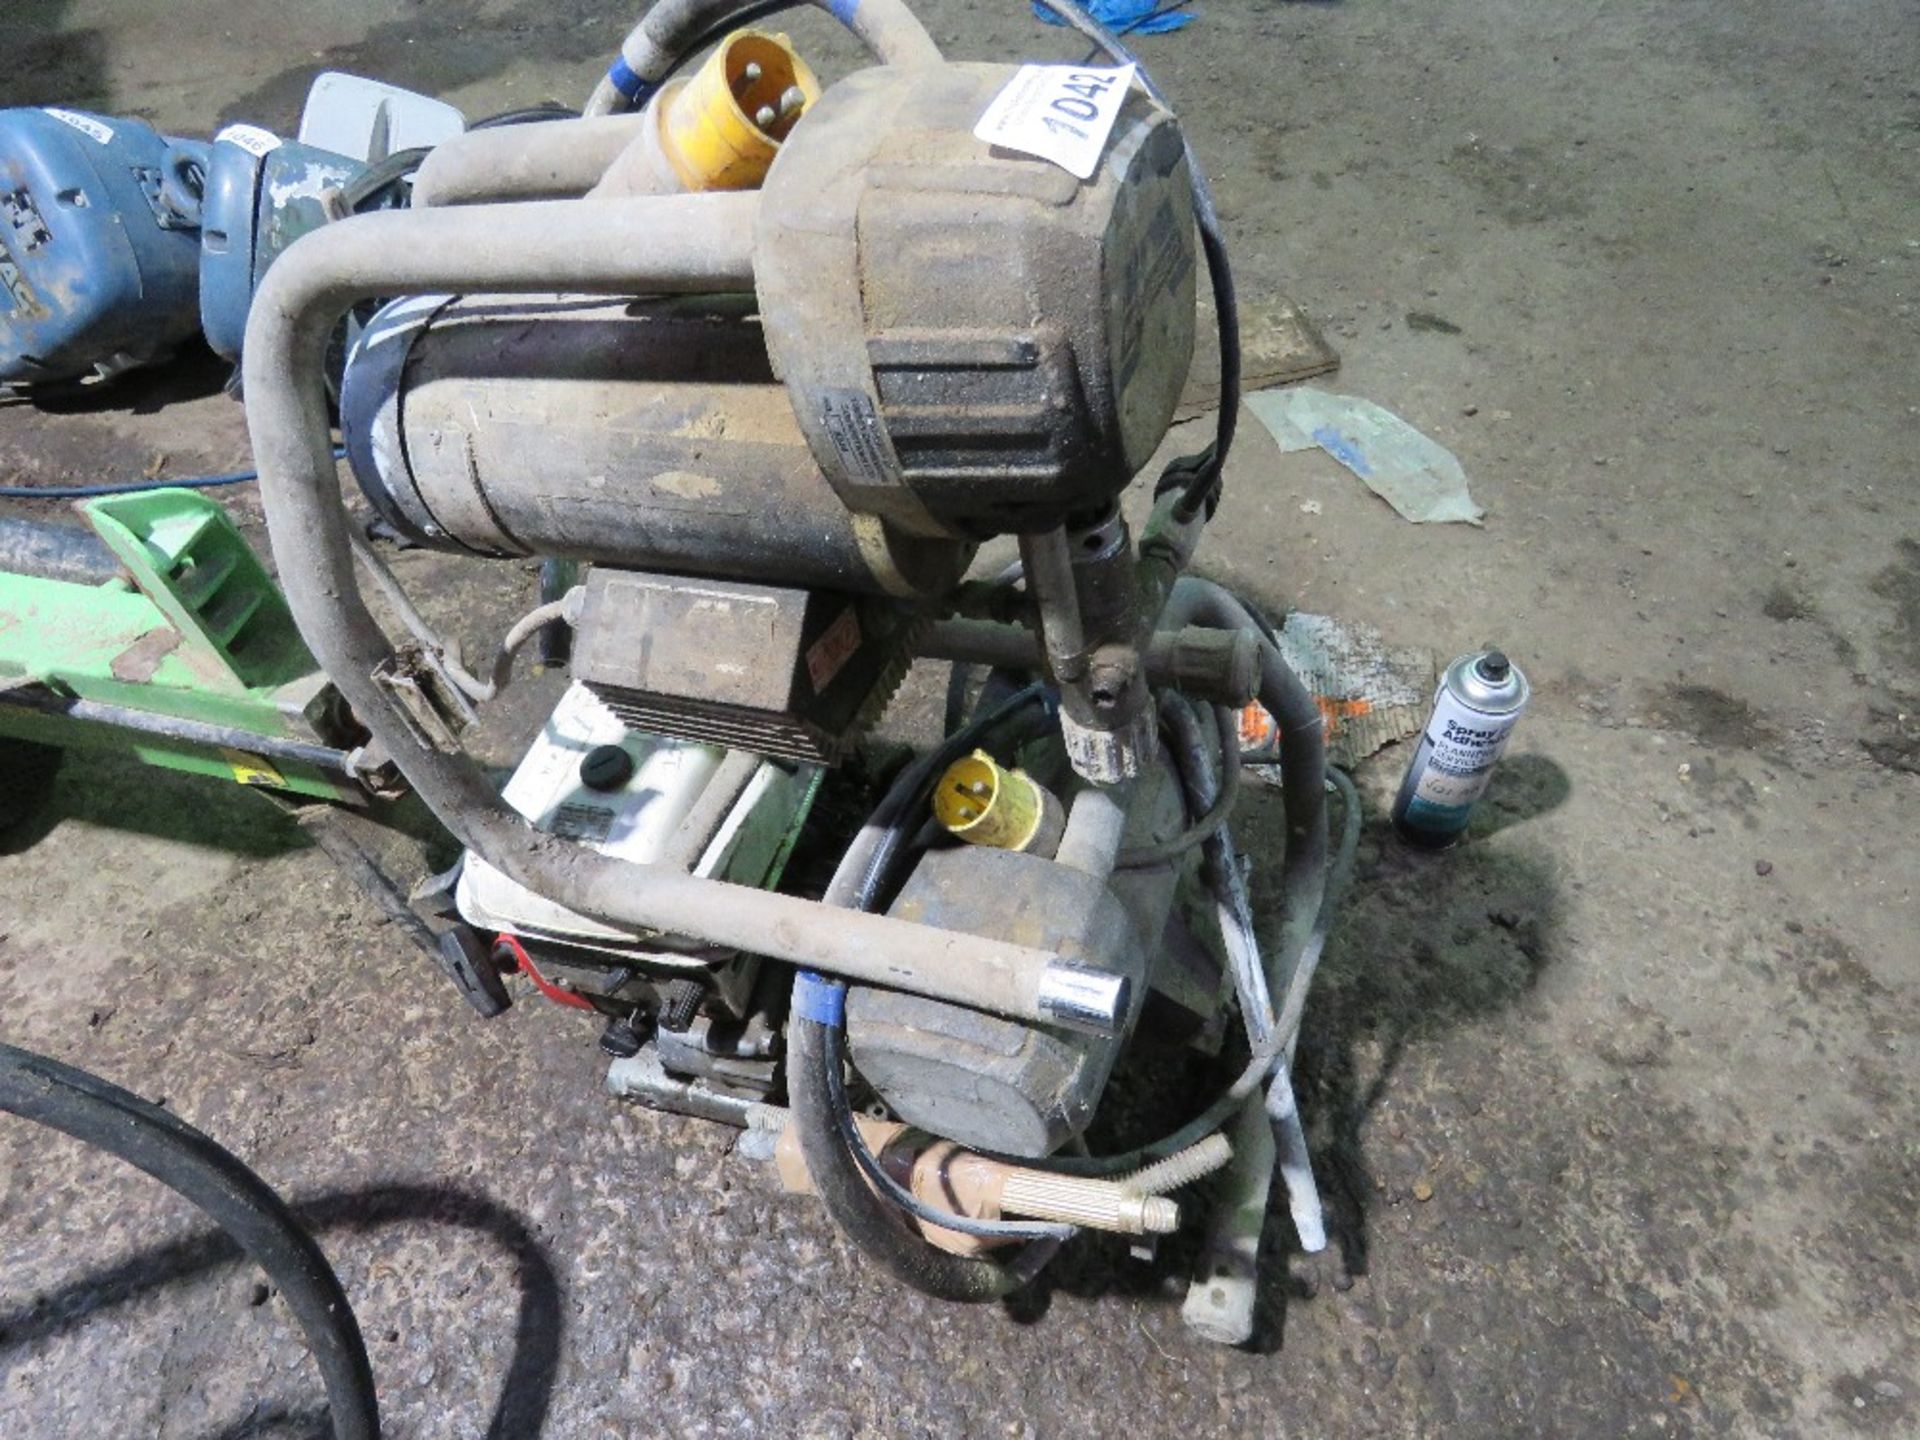 HONDA ENGINE AND 2 X AIRLESS SPRAYERS. THIS LOT IS SOLD UNDER THE AUCTIONEERS MARGIN SCHEME, THER